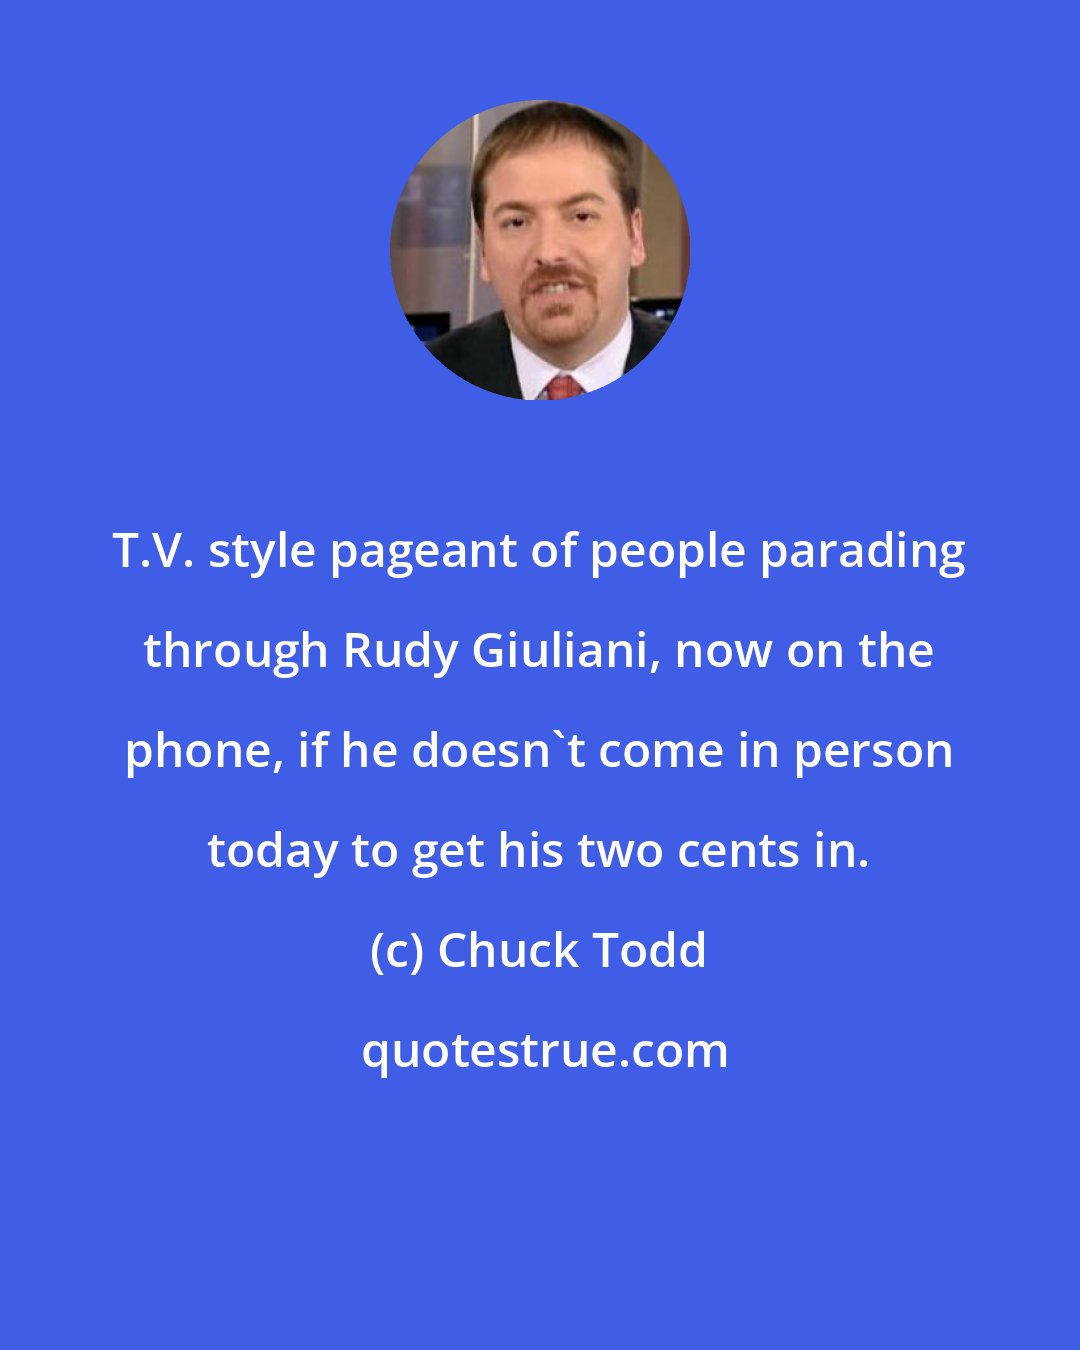 Chuck Todd: T.V. style pageant of people parading through Rudy Giuliani, now on the phone, if he doesn`t come in person today to get his two cents in.